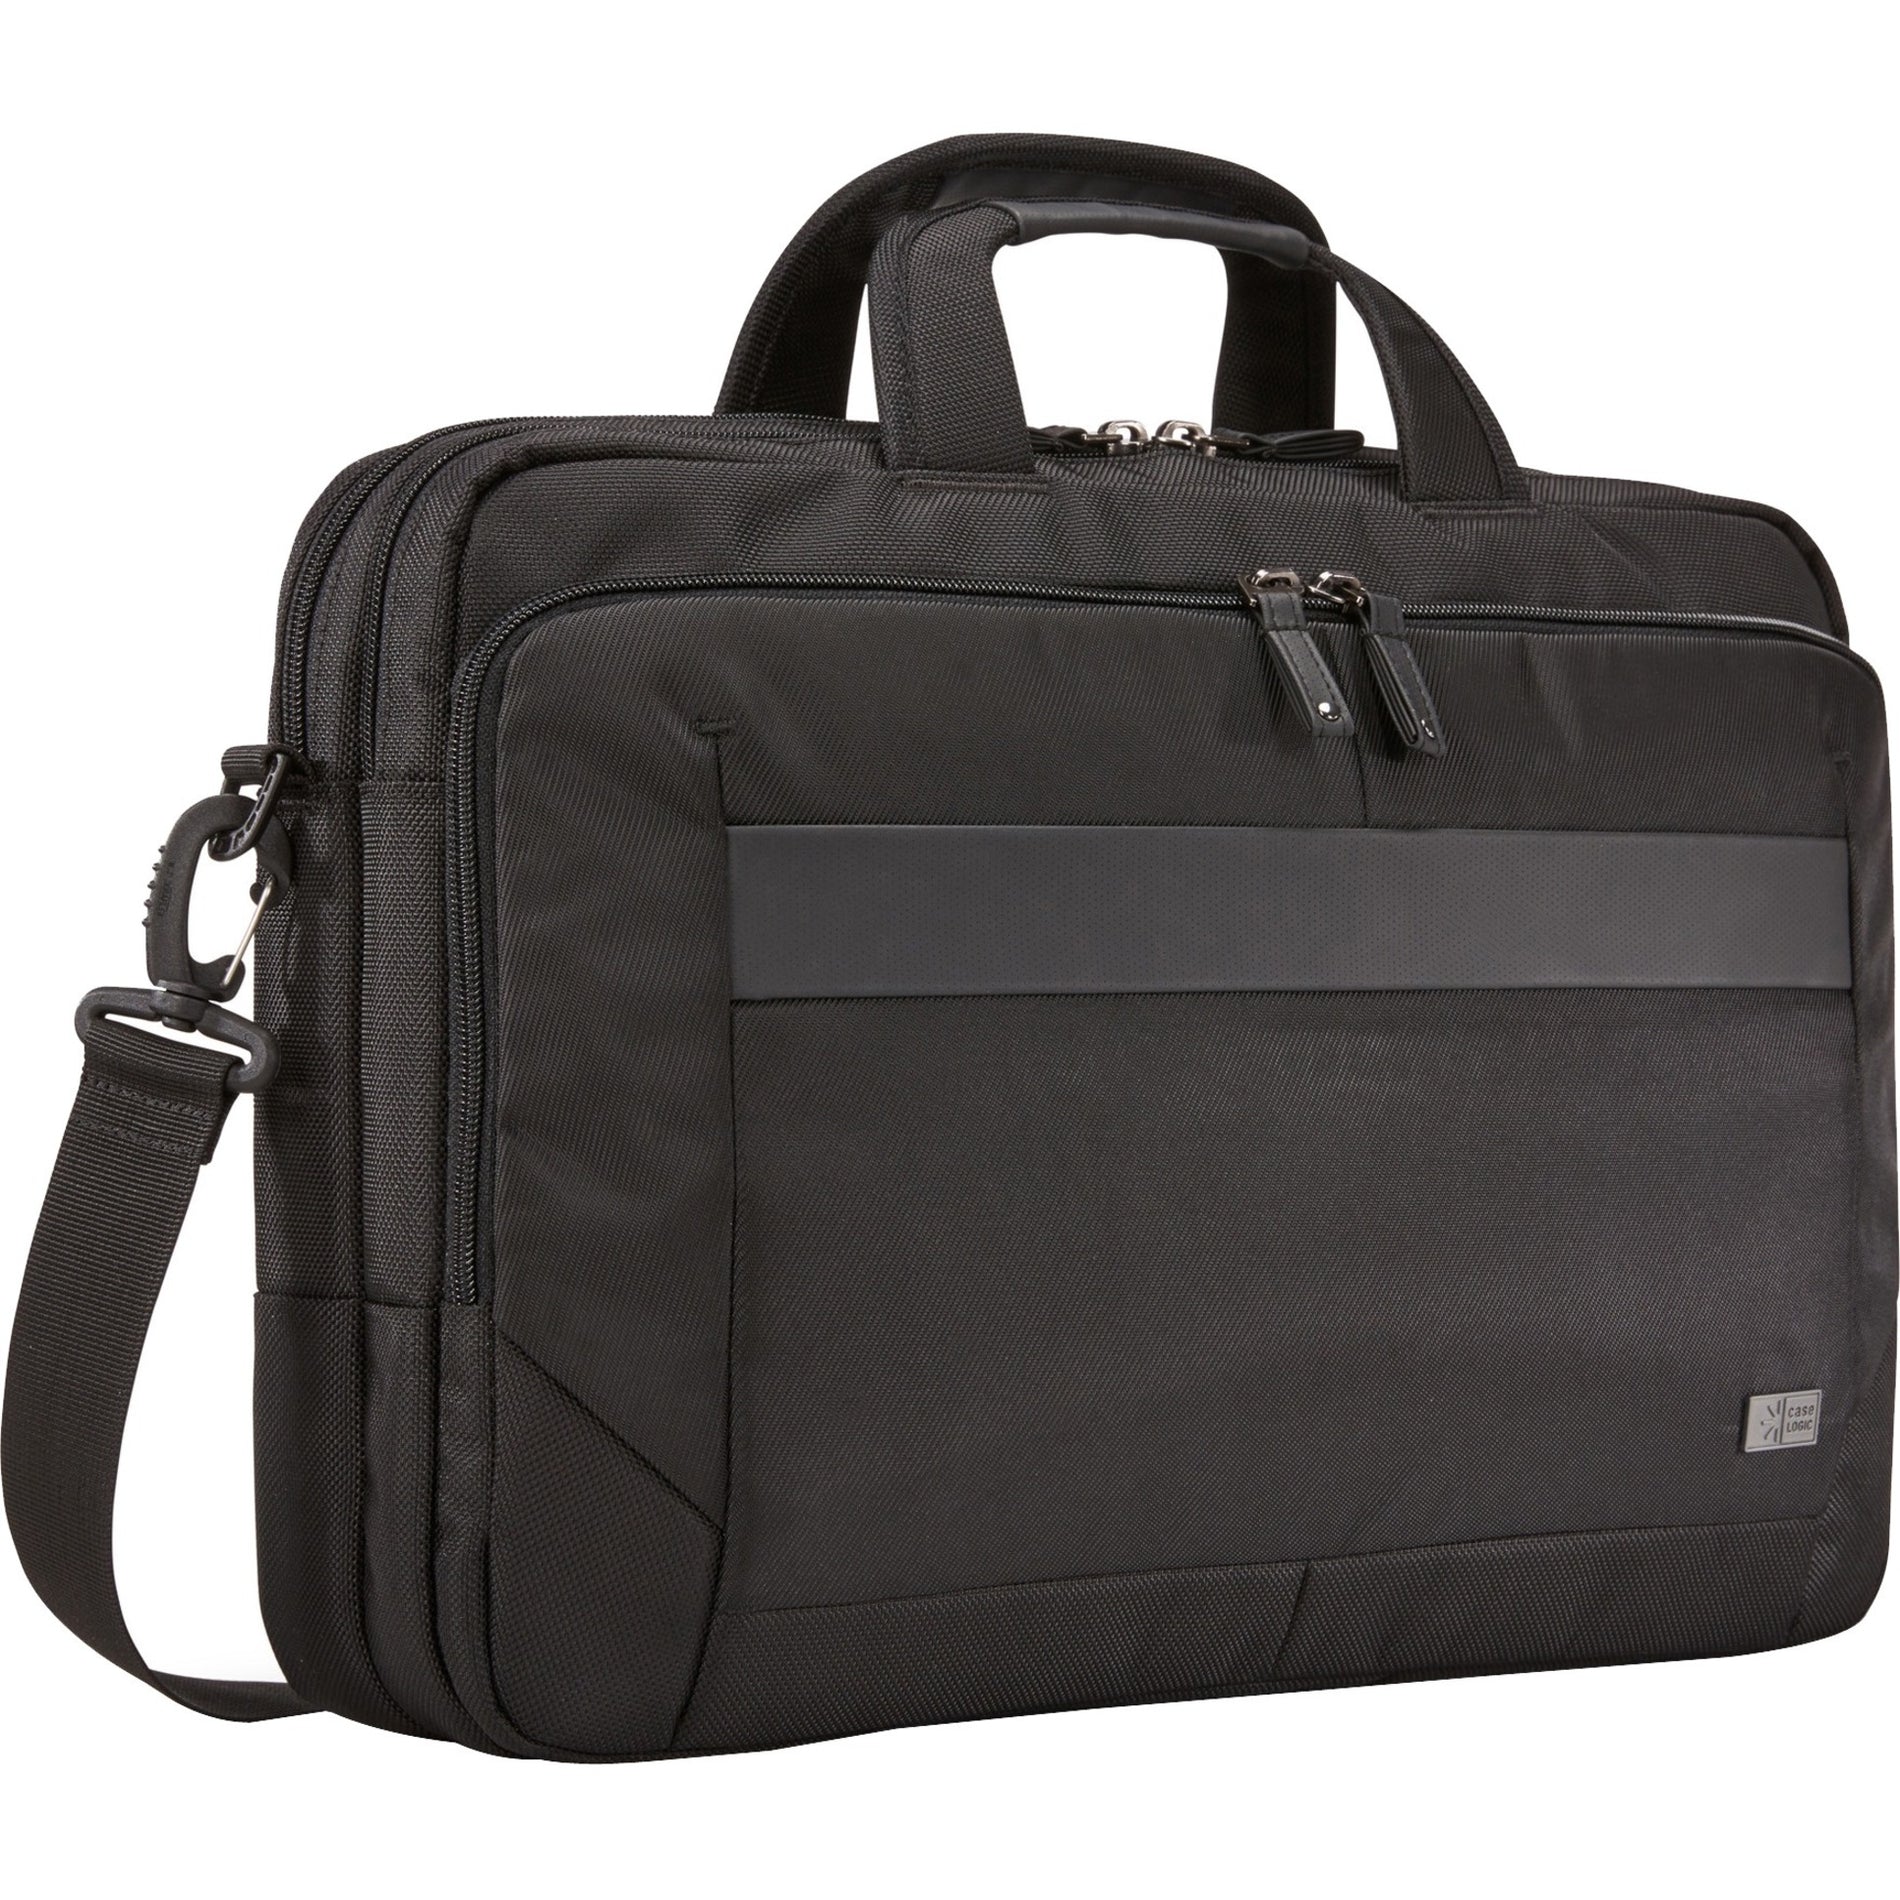 Case Logic 3204198 Notion 15.6in Briefcase, Tablet PC, Accessories, Notebook, Black Nylon